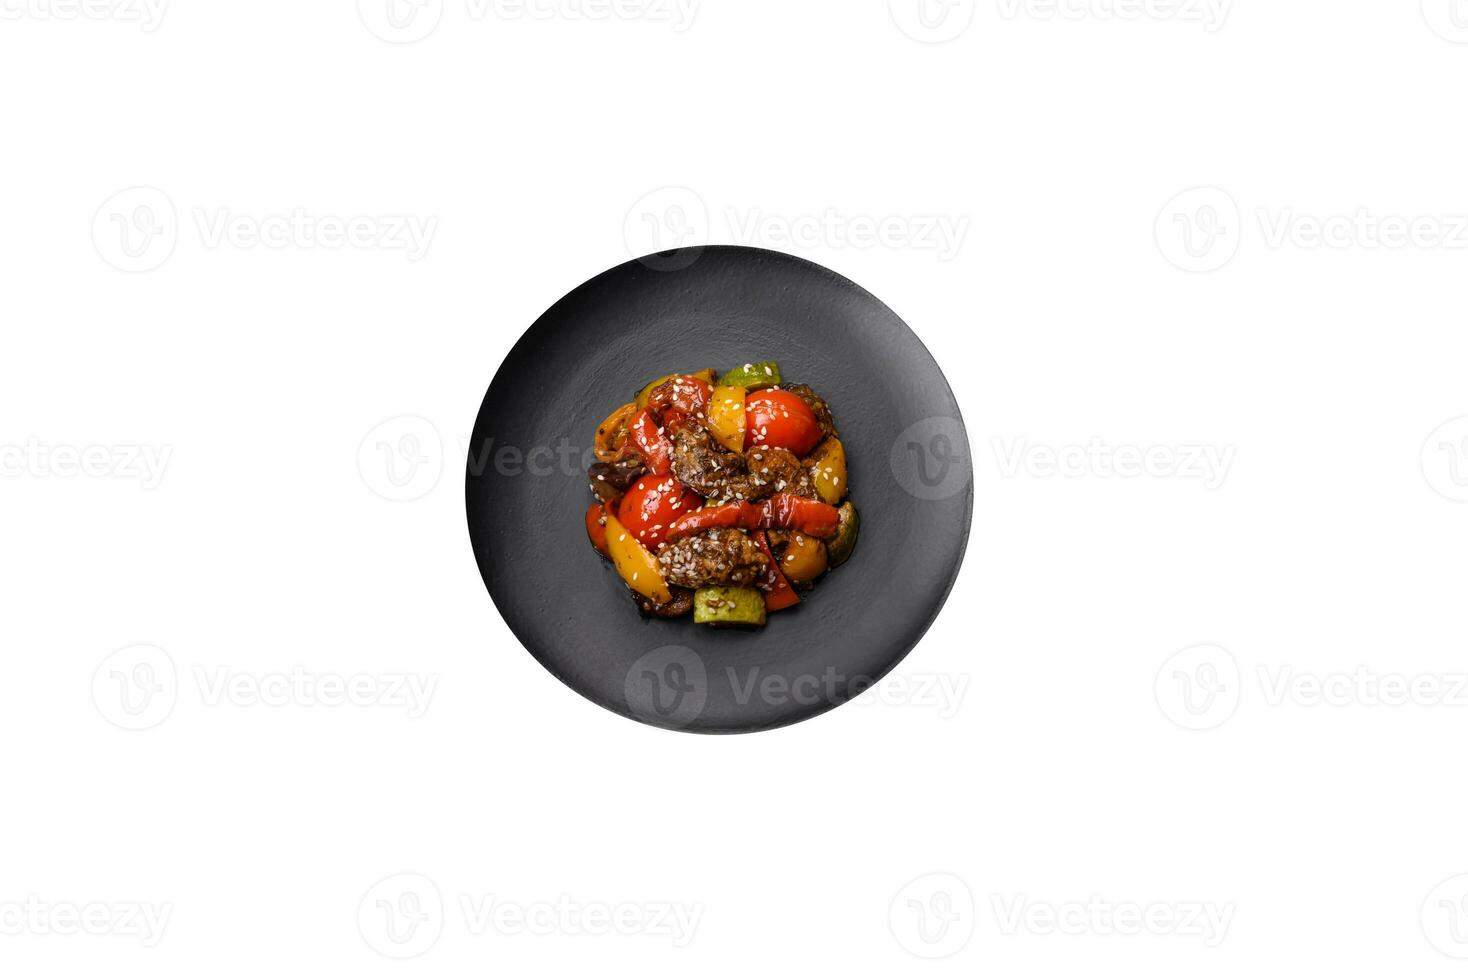 Warm salad with veal, tomatoes, peppers, zucchini, sesame, salt, spices and herbs photo